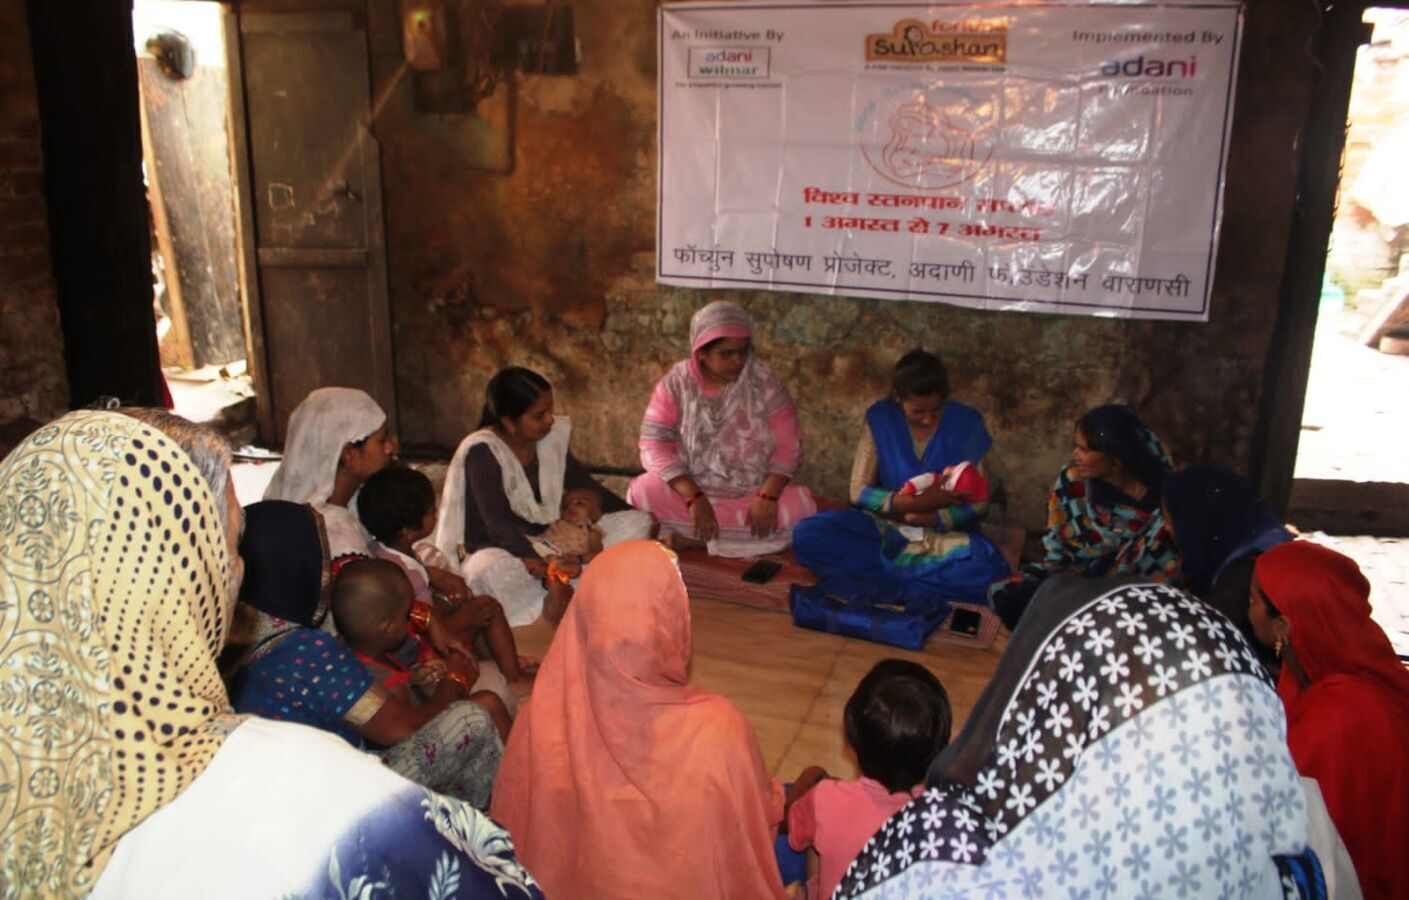 Awareness program with pregnant women on the occasion of World Breastfeeding Week by Adani Foundation